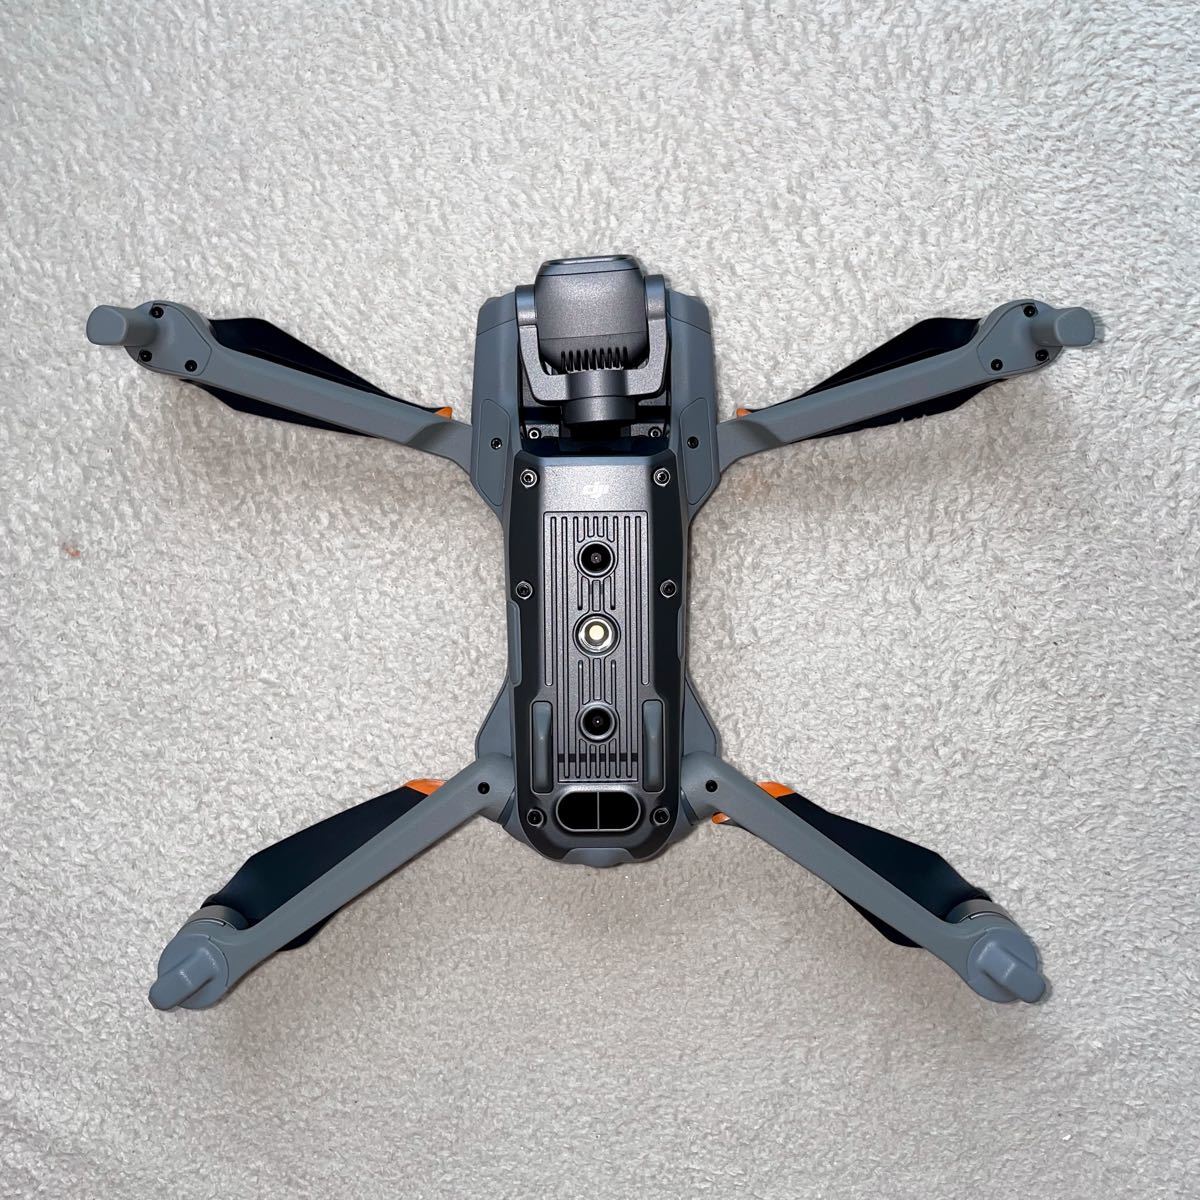 DJI Air 2S Fly More コンボ　付属品多数　バッテリー 4個　1年保険付き